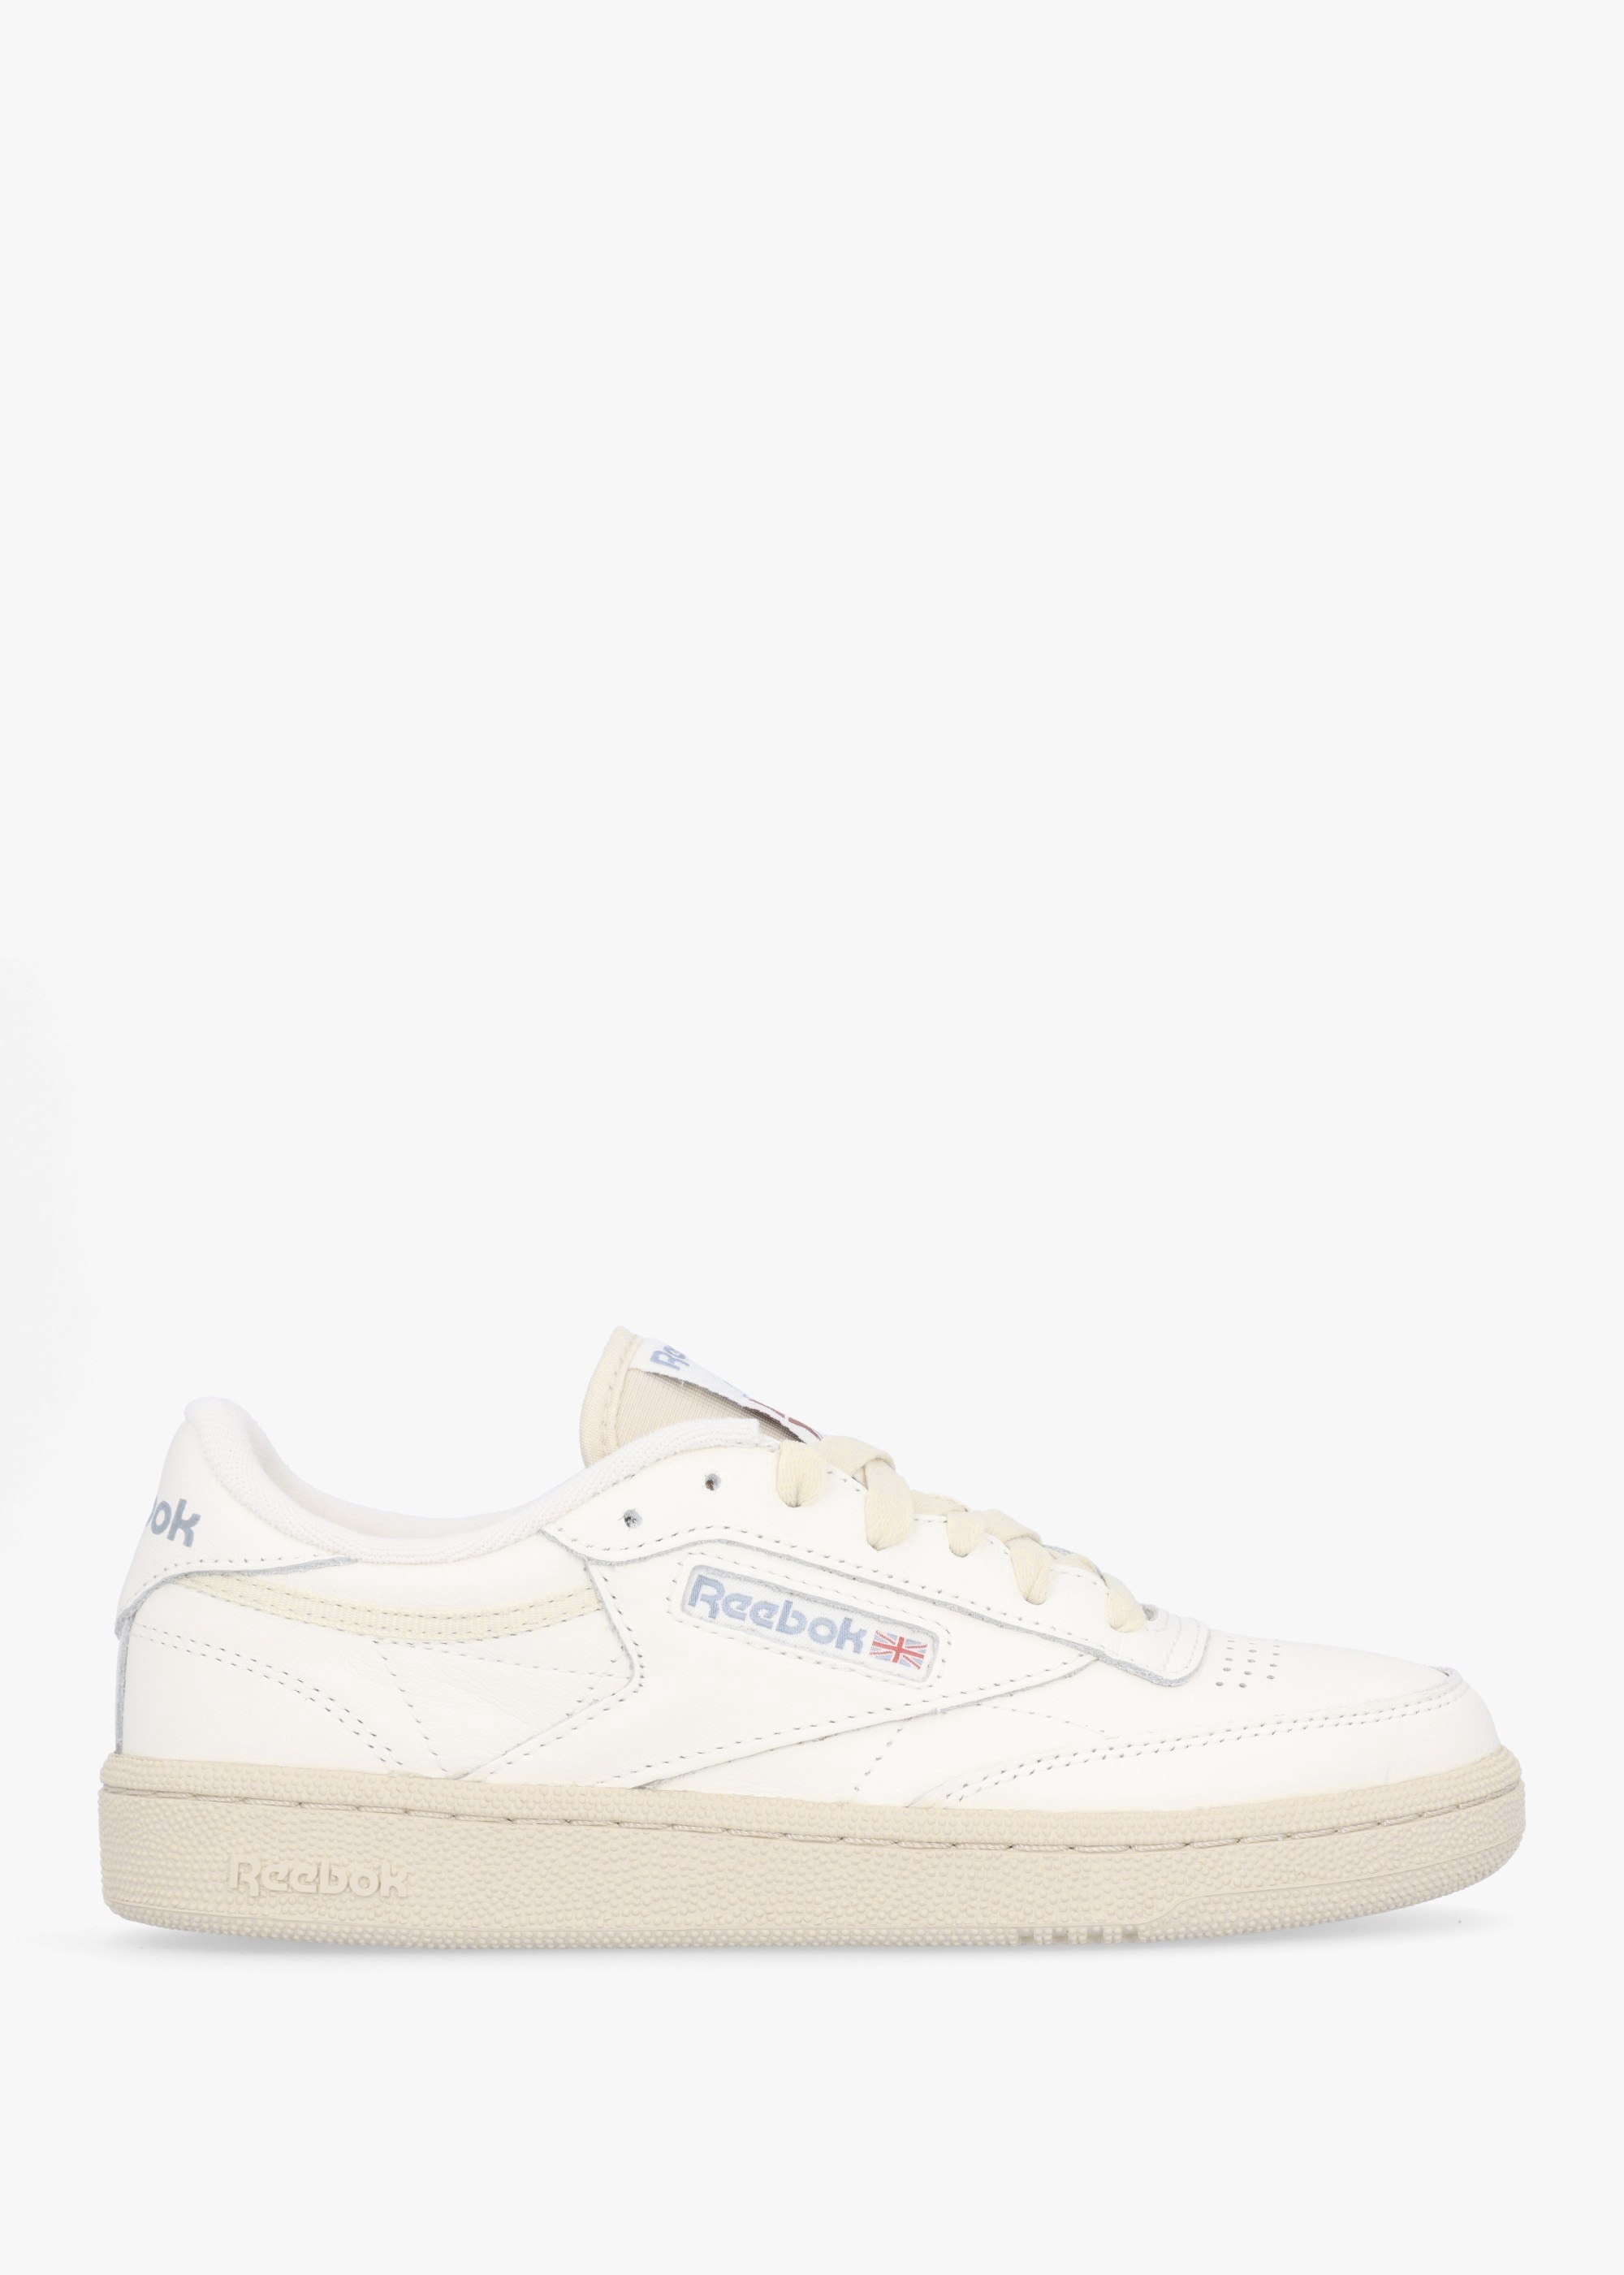 Reebok  Womens Club C 85 Leather Tennis Trainers In Chalk/Paper White/Vintage Blue